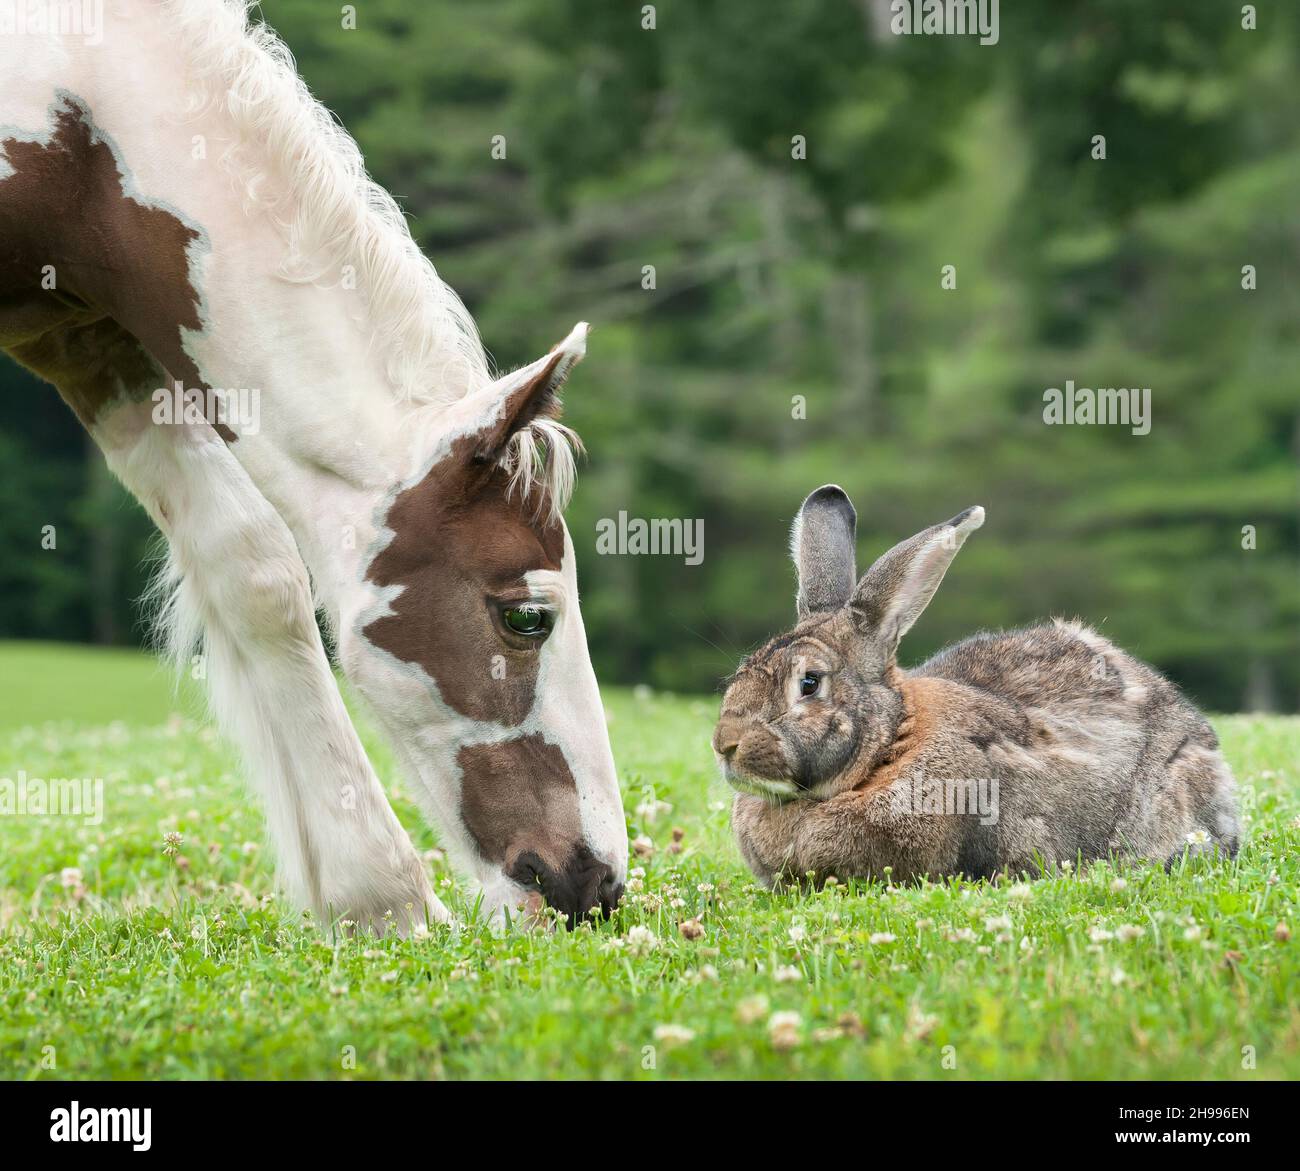 Flemish Giant rabbit and foal Stock Photo